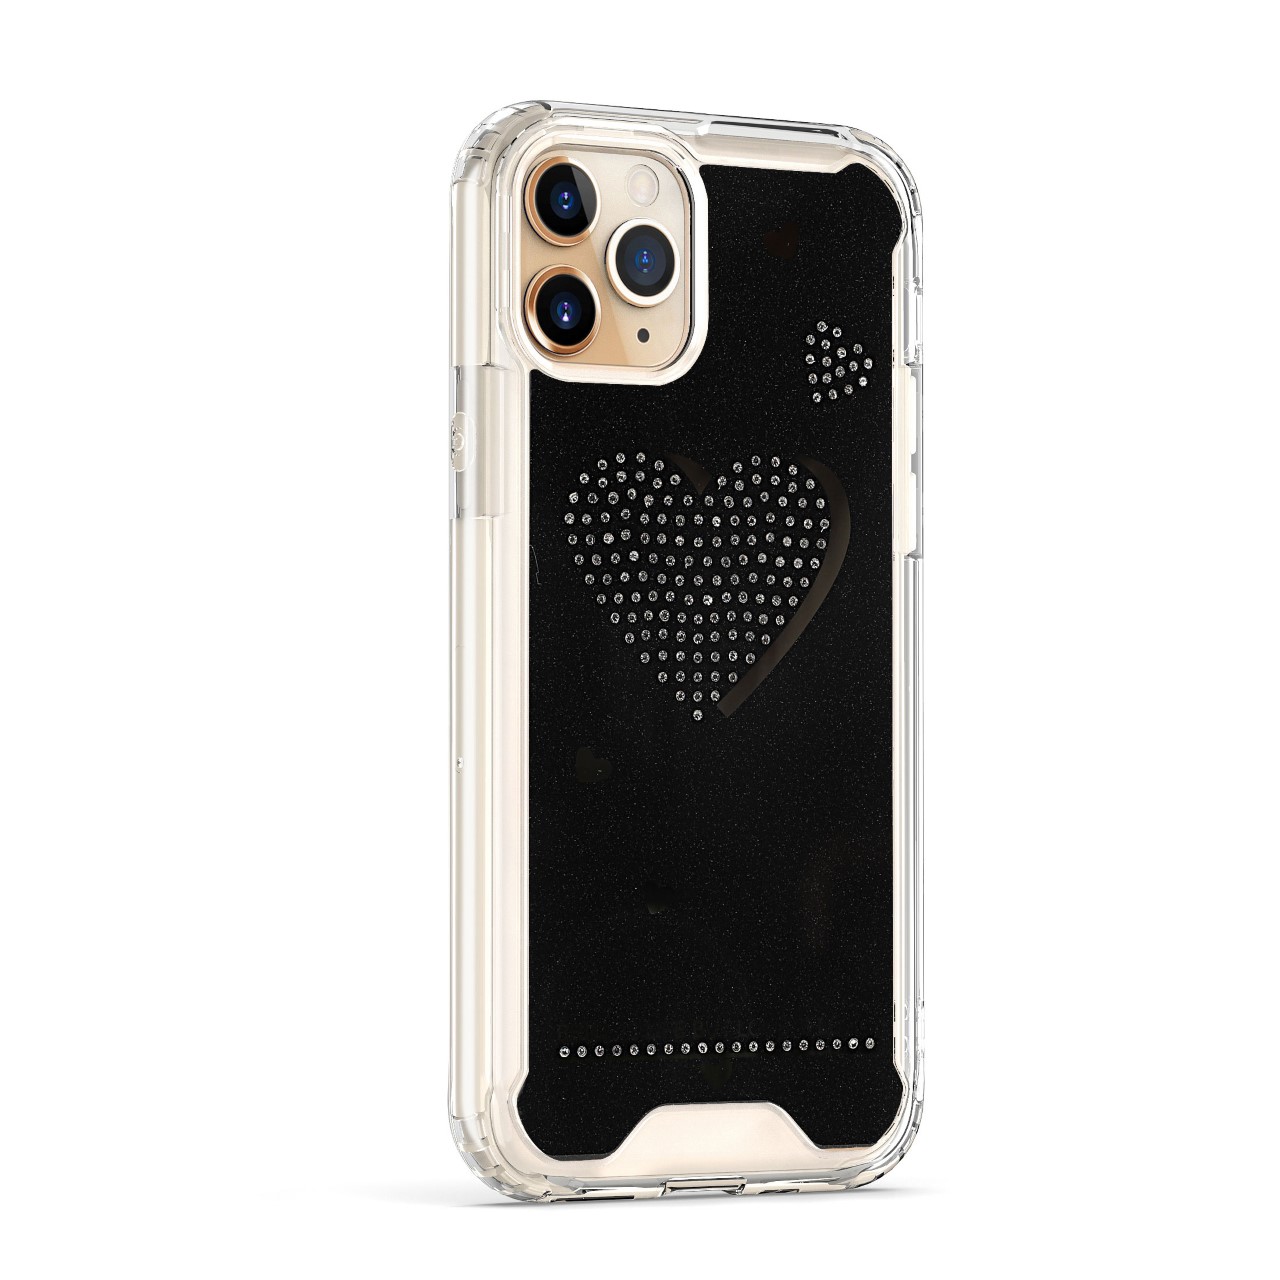 APPLE IPHONE 11 - MOBILIZE JEWEL HYBRID CASE W/ DIAMONDS BRIEF IS LIFE BUT LOVE IS LONG - BLACK (48